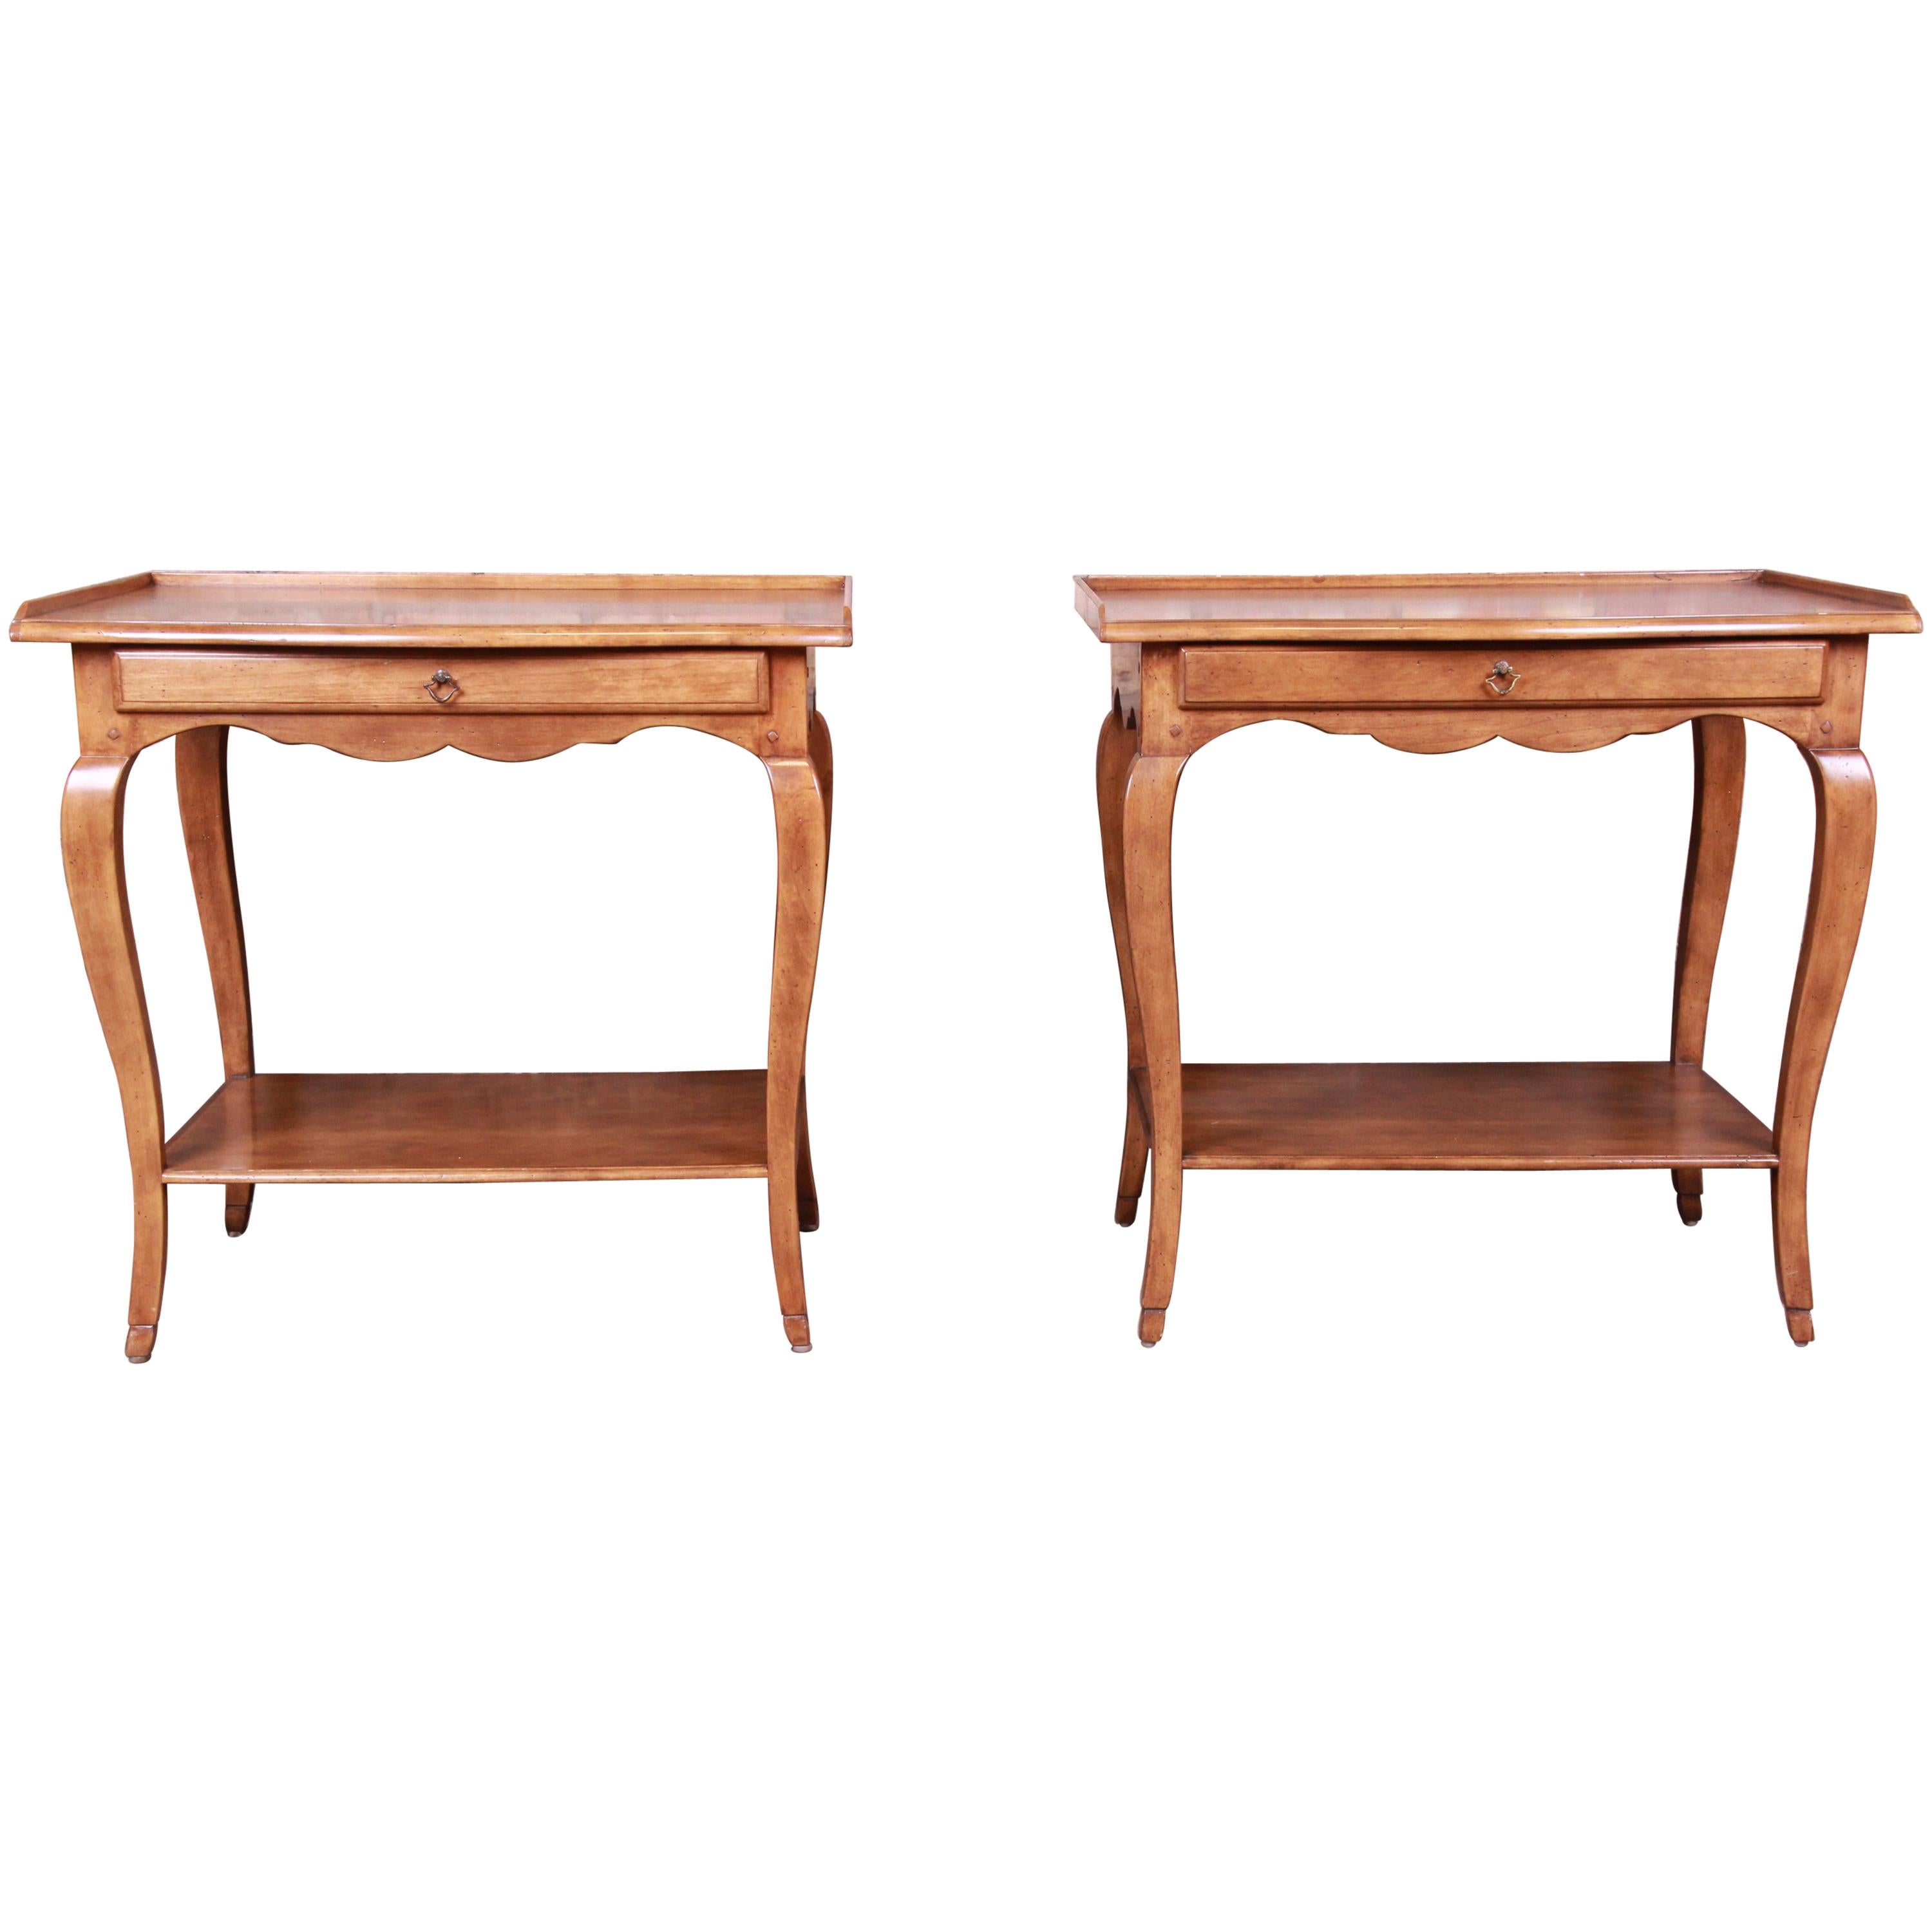 Minton-Spidell French Provincial Louis XV Maple Nightstands, Pair